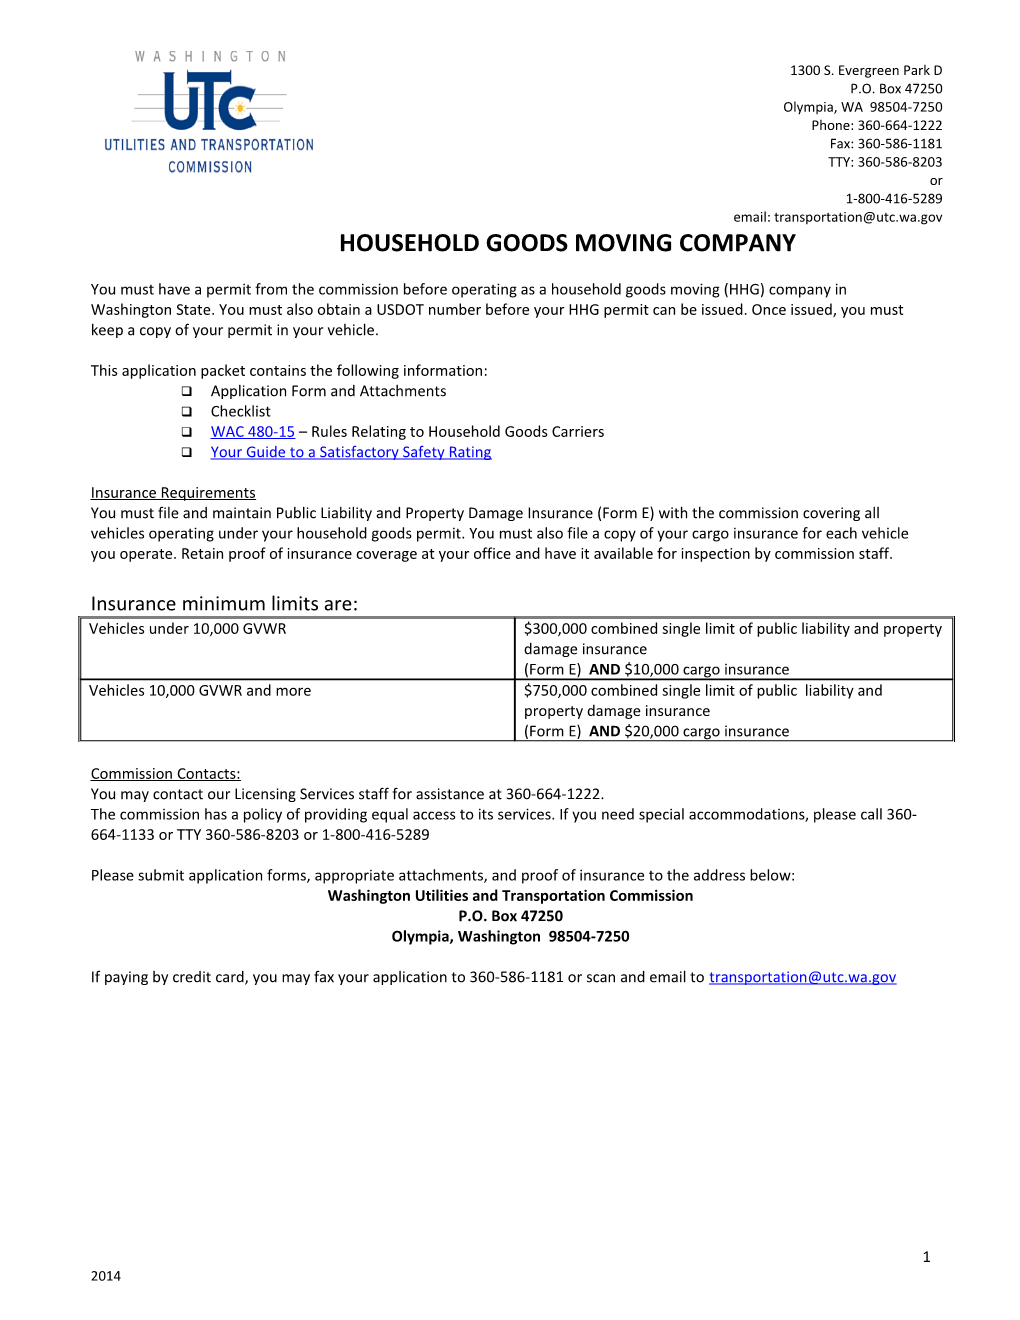 Household Goods Moving Company Application